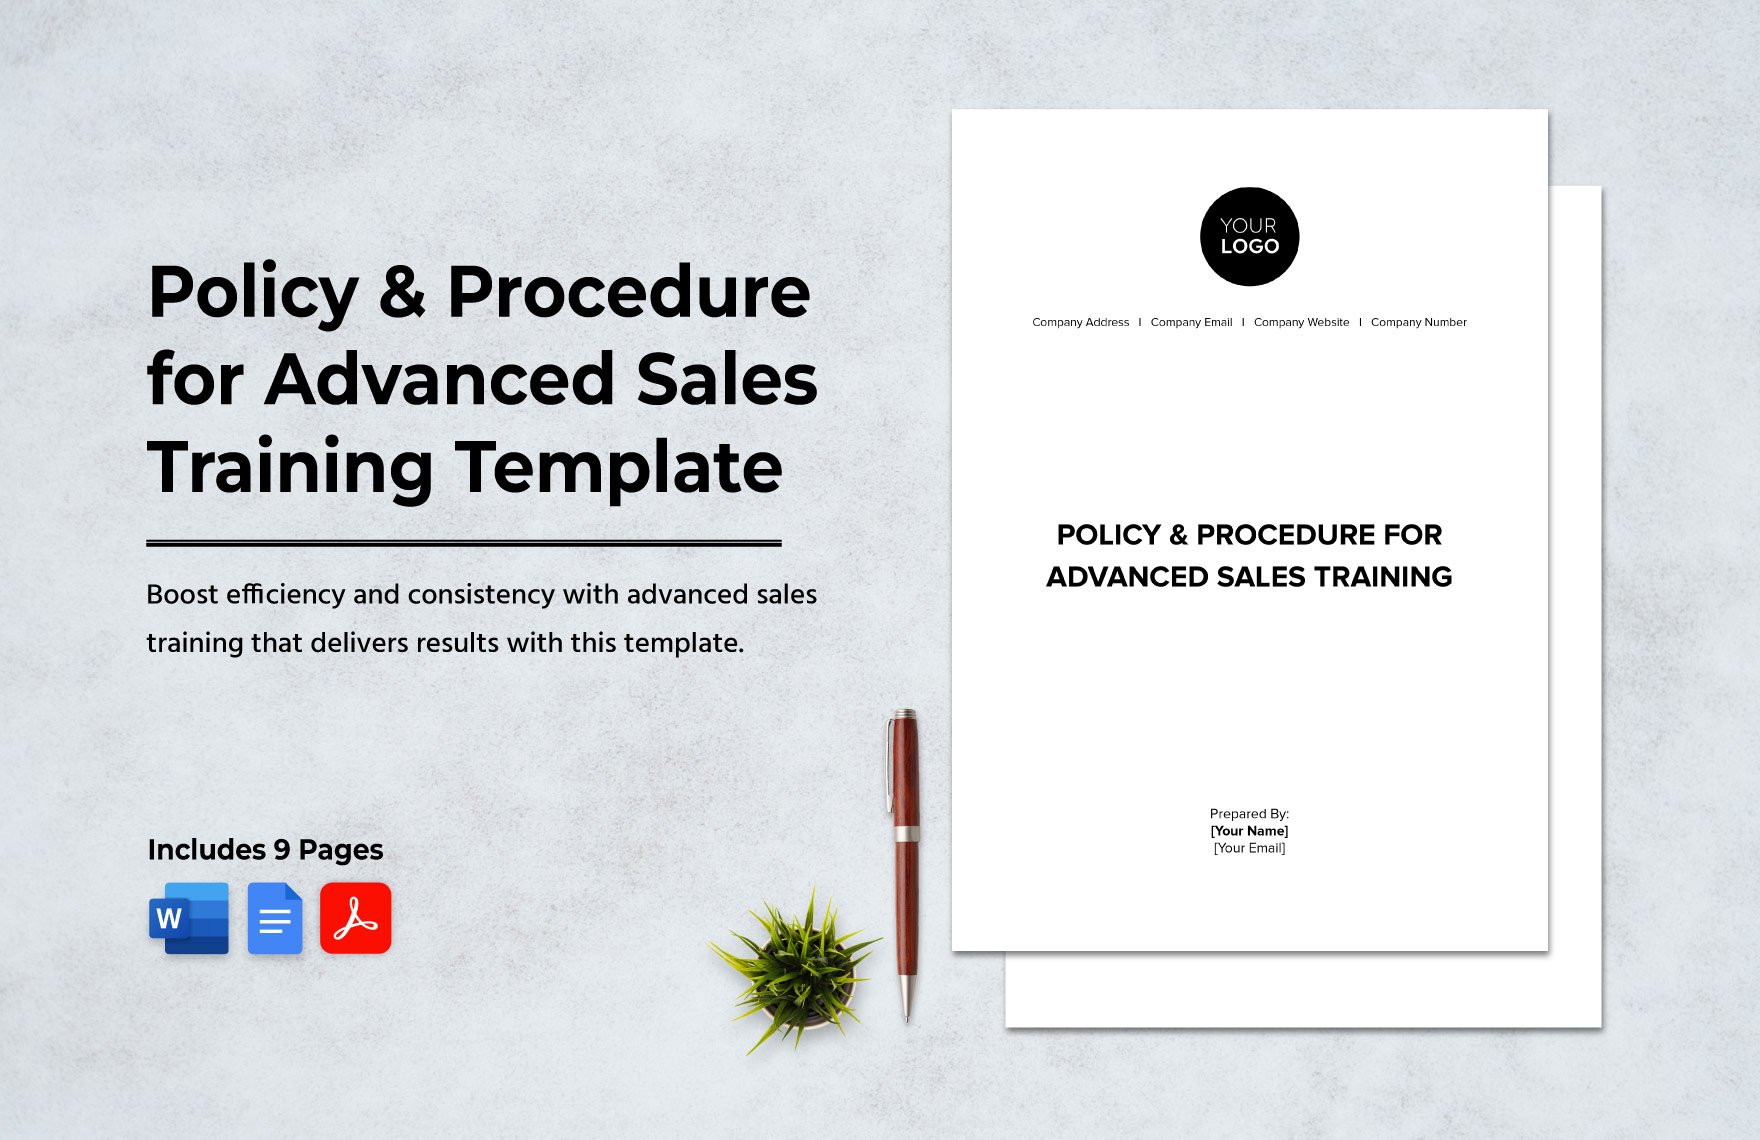 Policy & Procedure for Advanced Sales Training Template